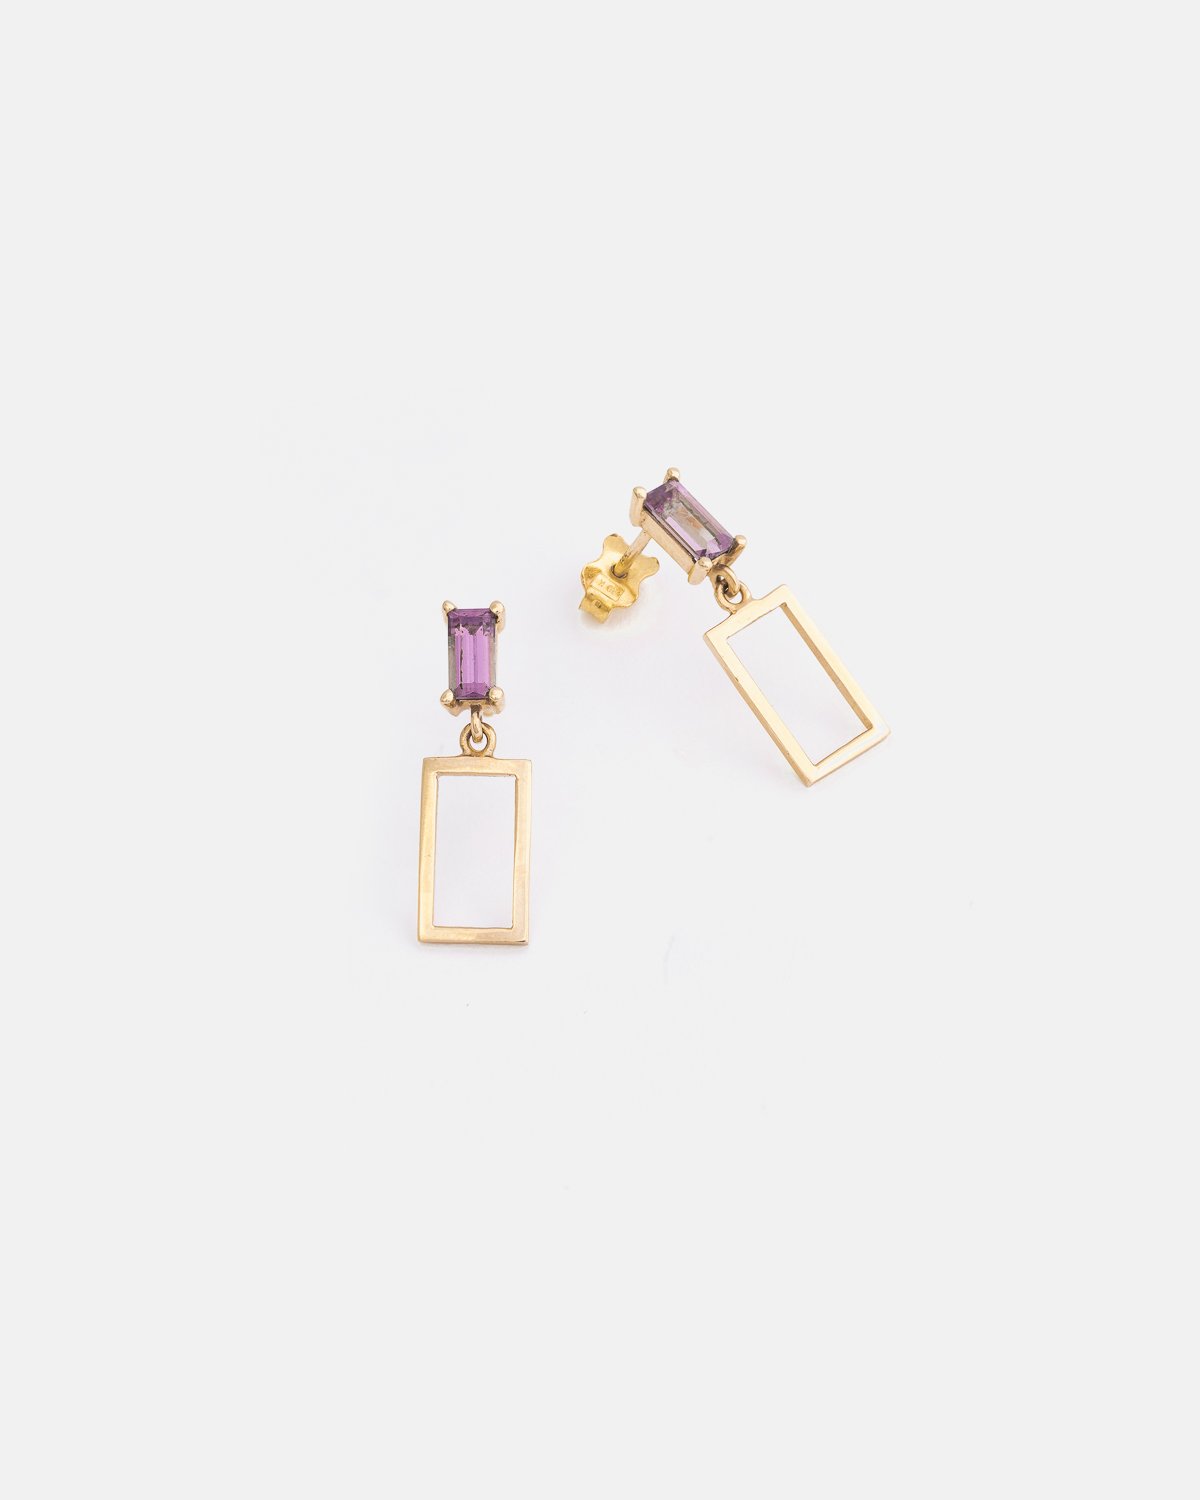 Liaisons Earrings in Yellow Gold with Purple Spinel